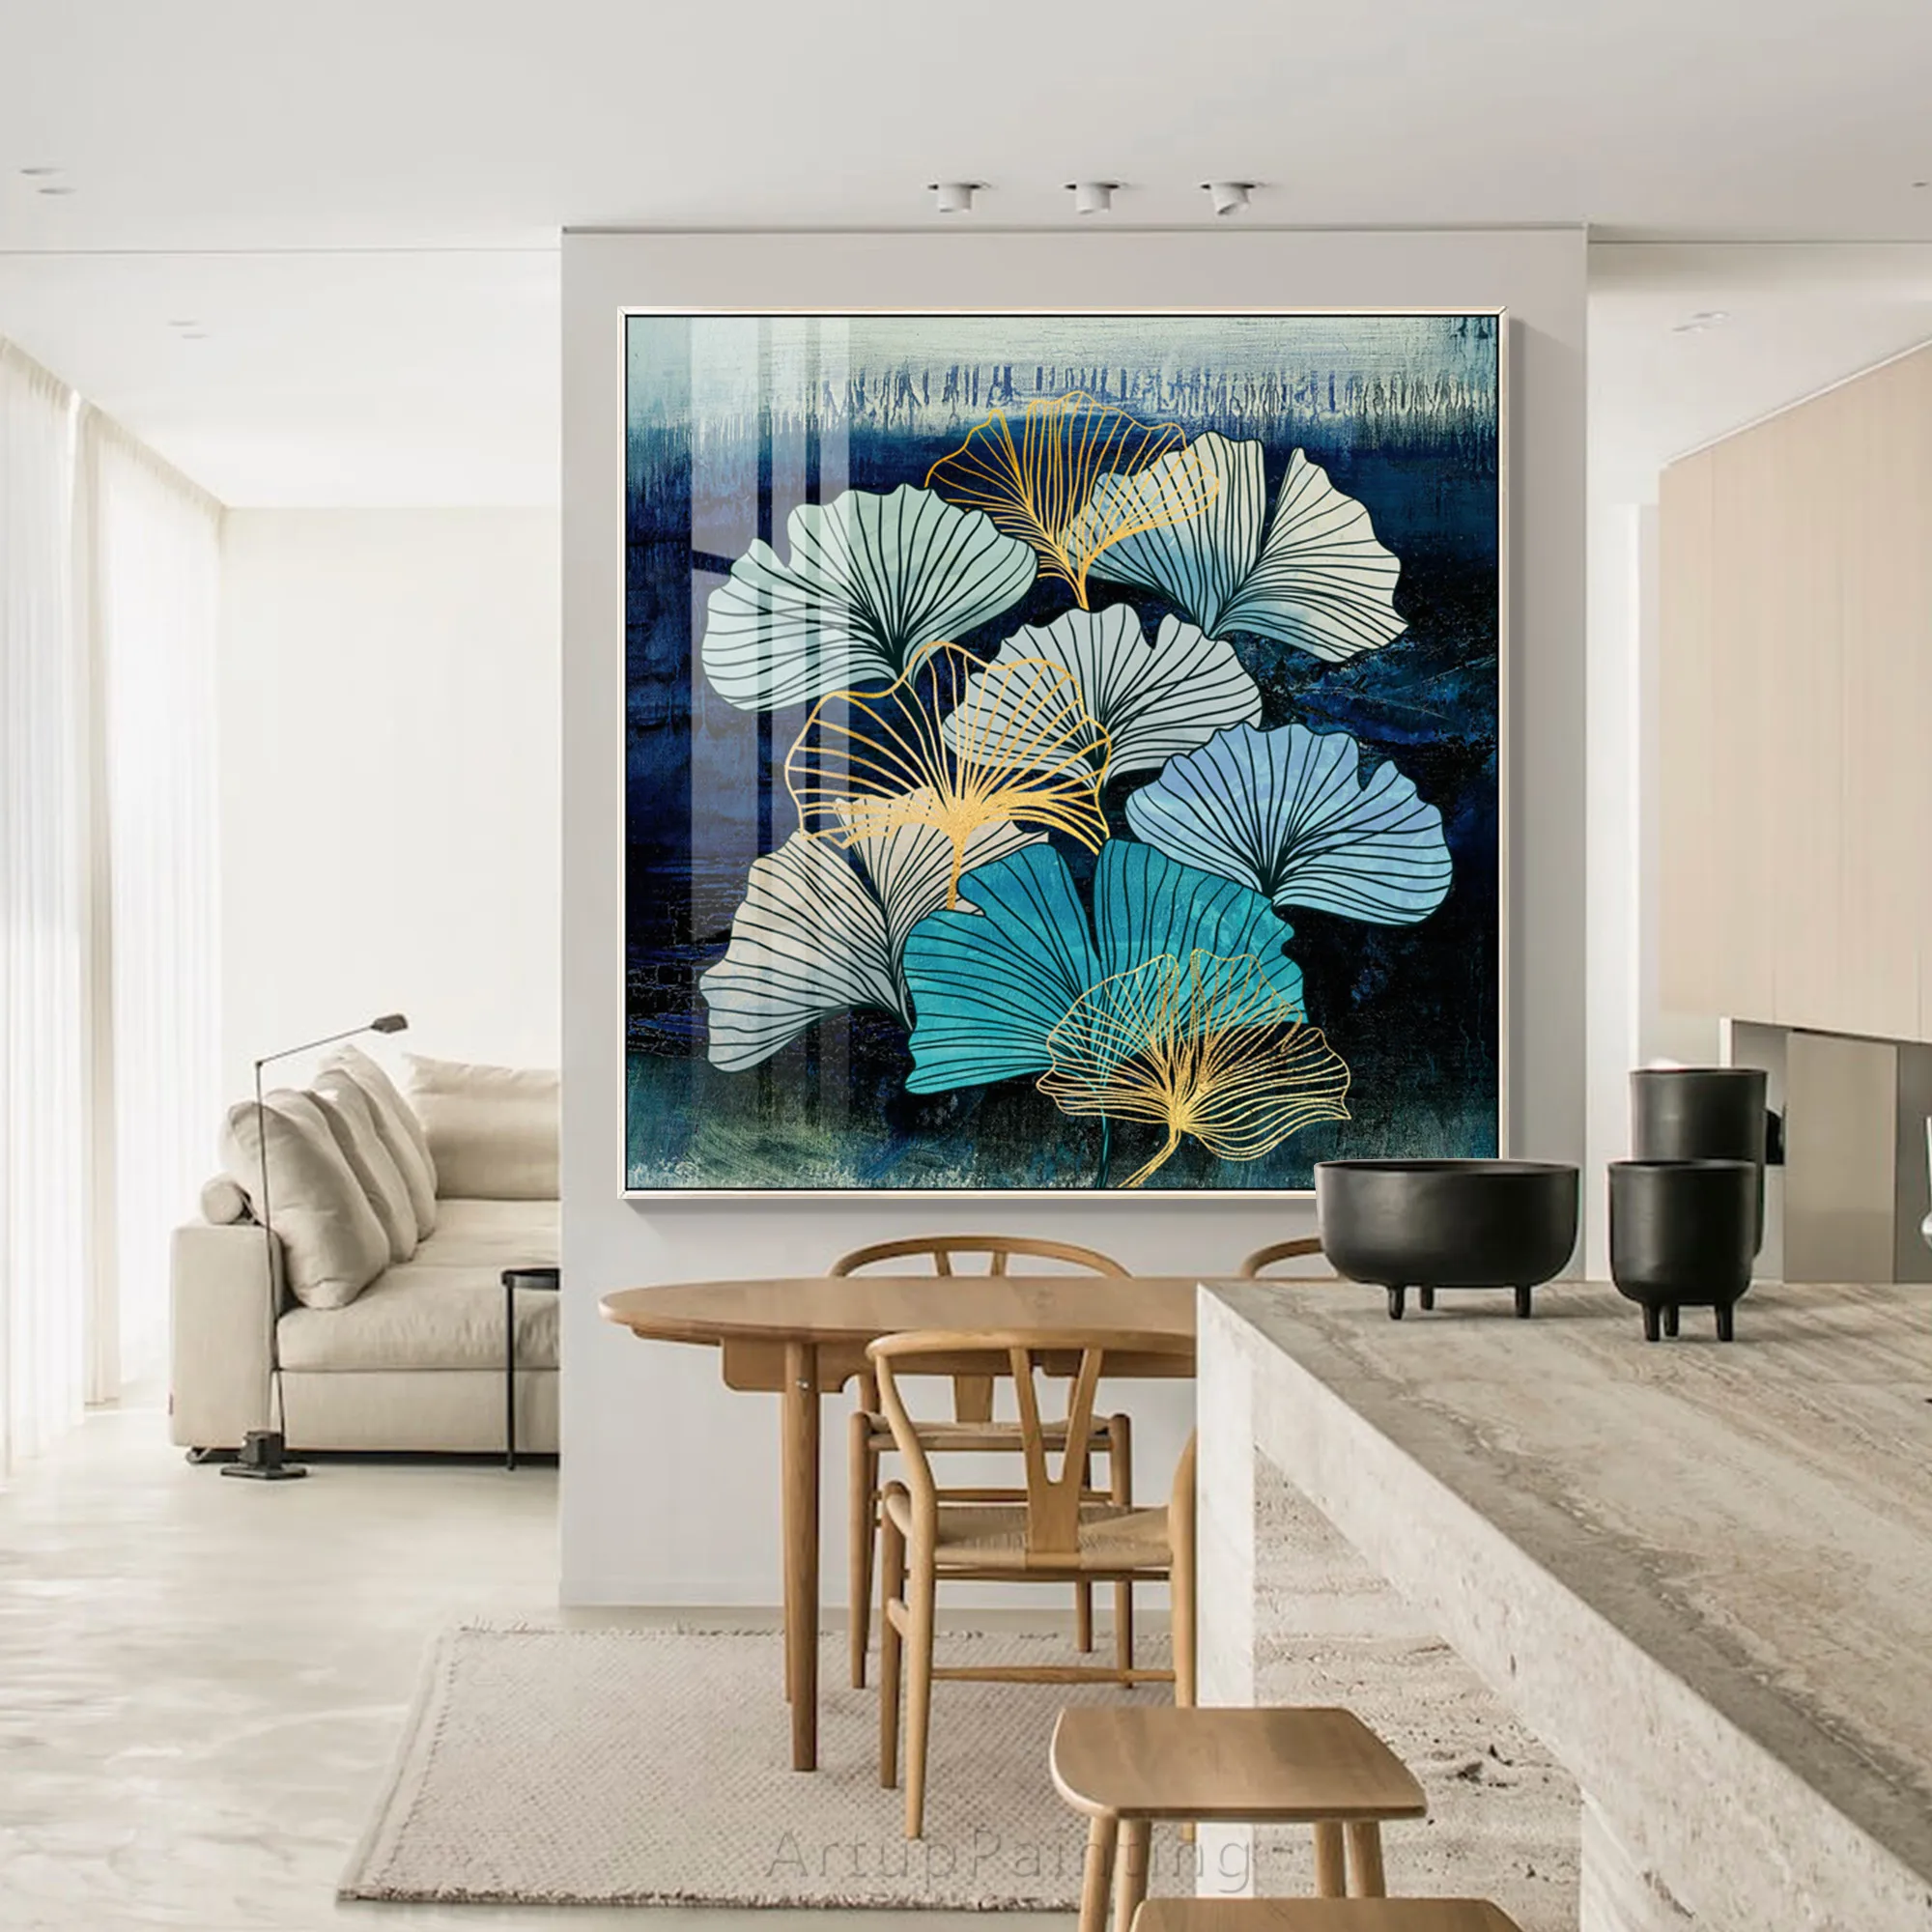 

No Framed Hand Painted Lotus Leaf Abstract Art Blue Ginko Biloba Painting 1 Wall Pictures For Room Caudros Decoracion for Women